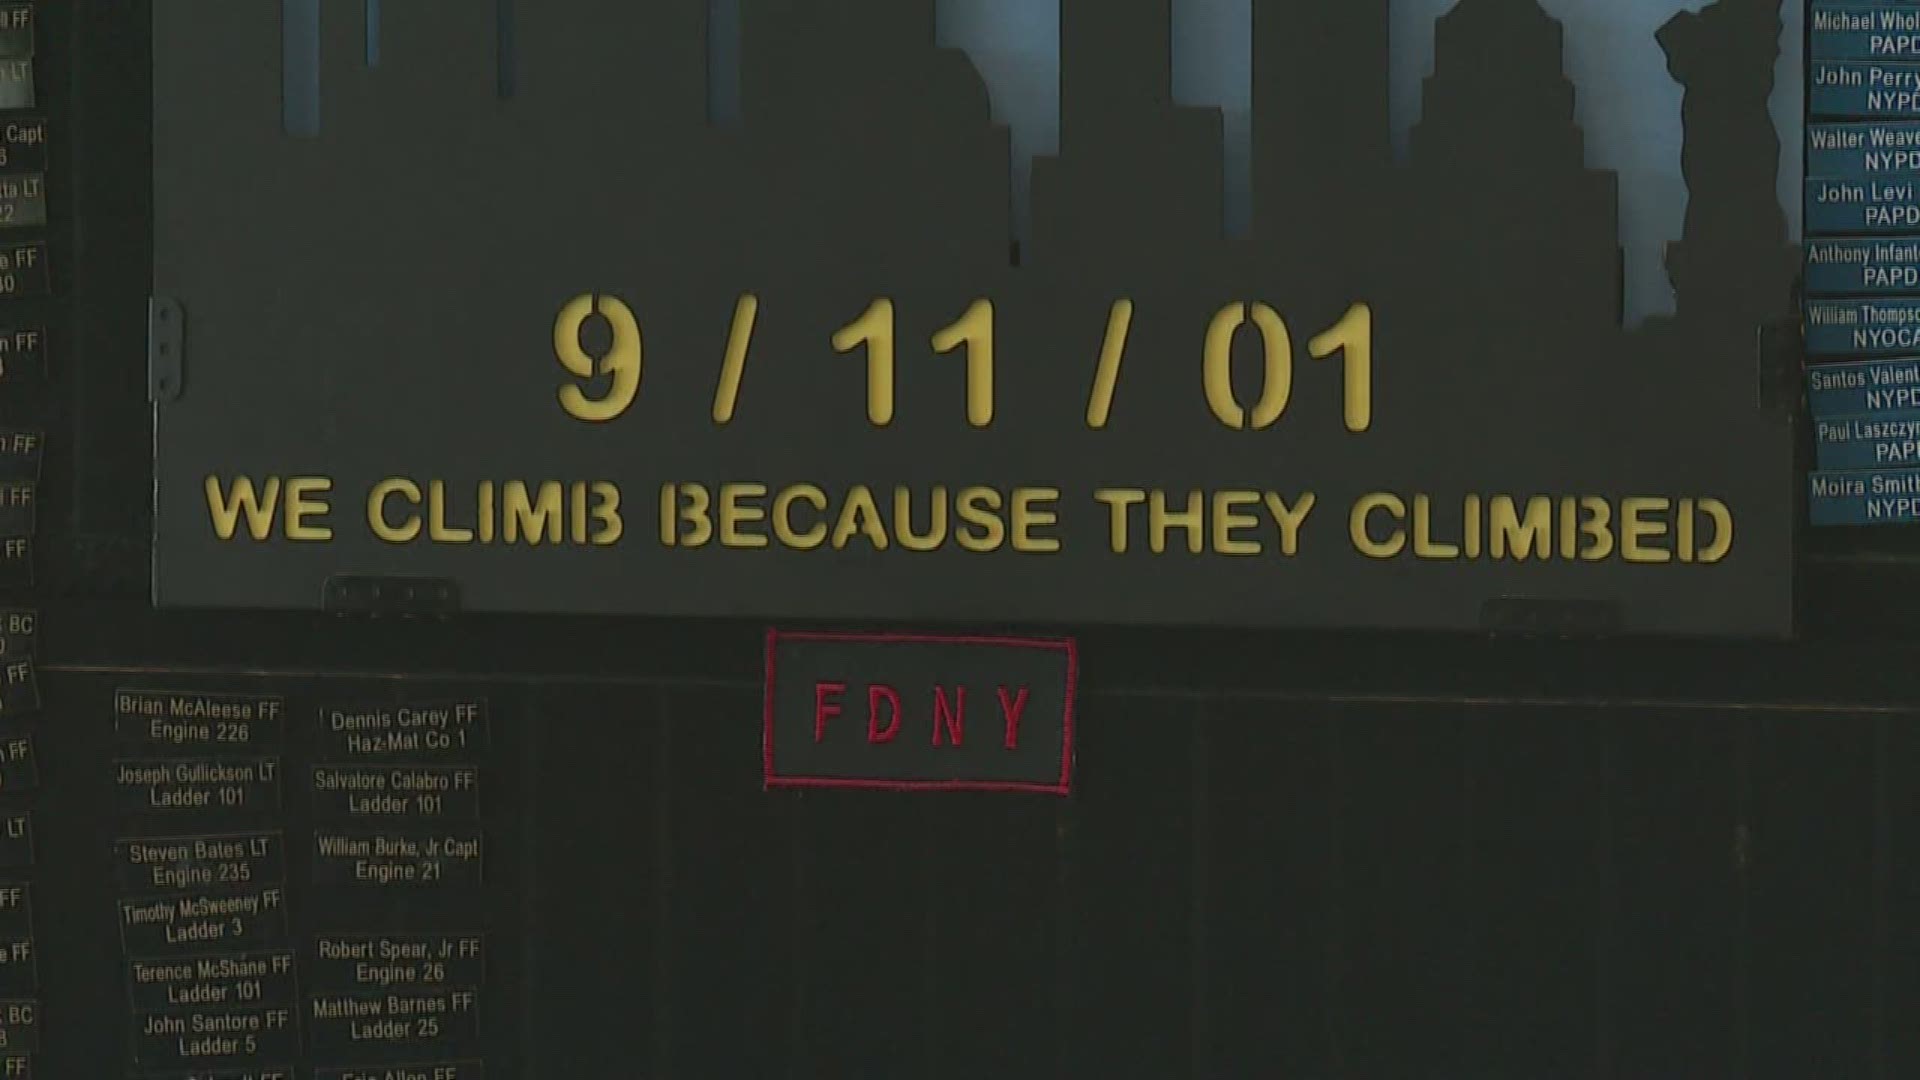 The Dallas 9/11 Memorial Stair Climb is an annual remembrance, choreographed around September 11, 2001 events.  A moment of silence at 8:46AM marks the time Flight 11 hit the North Tower, then first responders begin their trek up the stairs, equivalent to